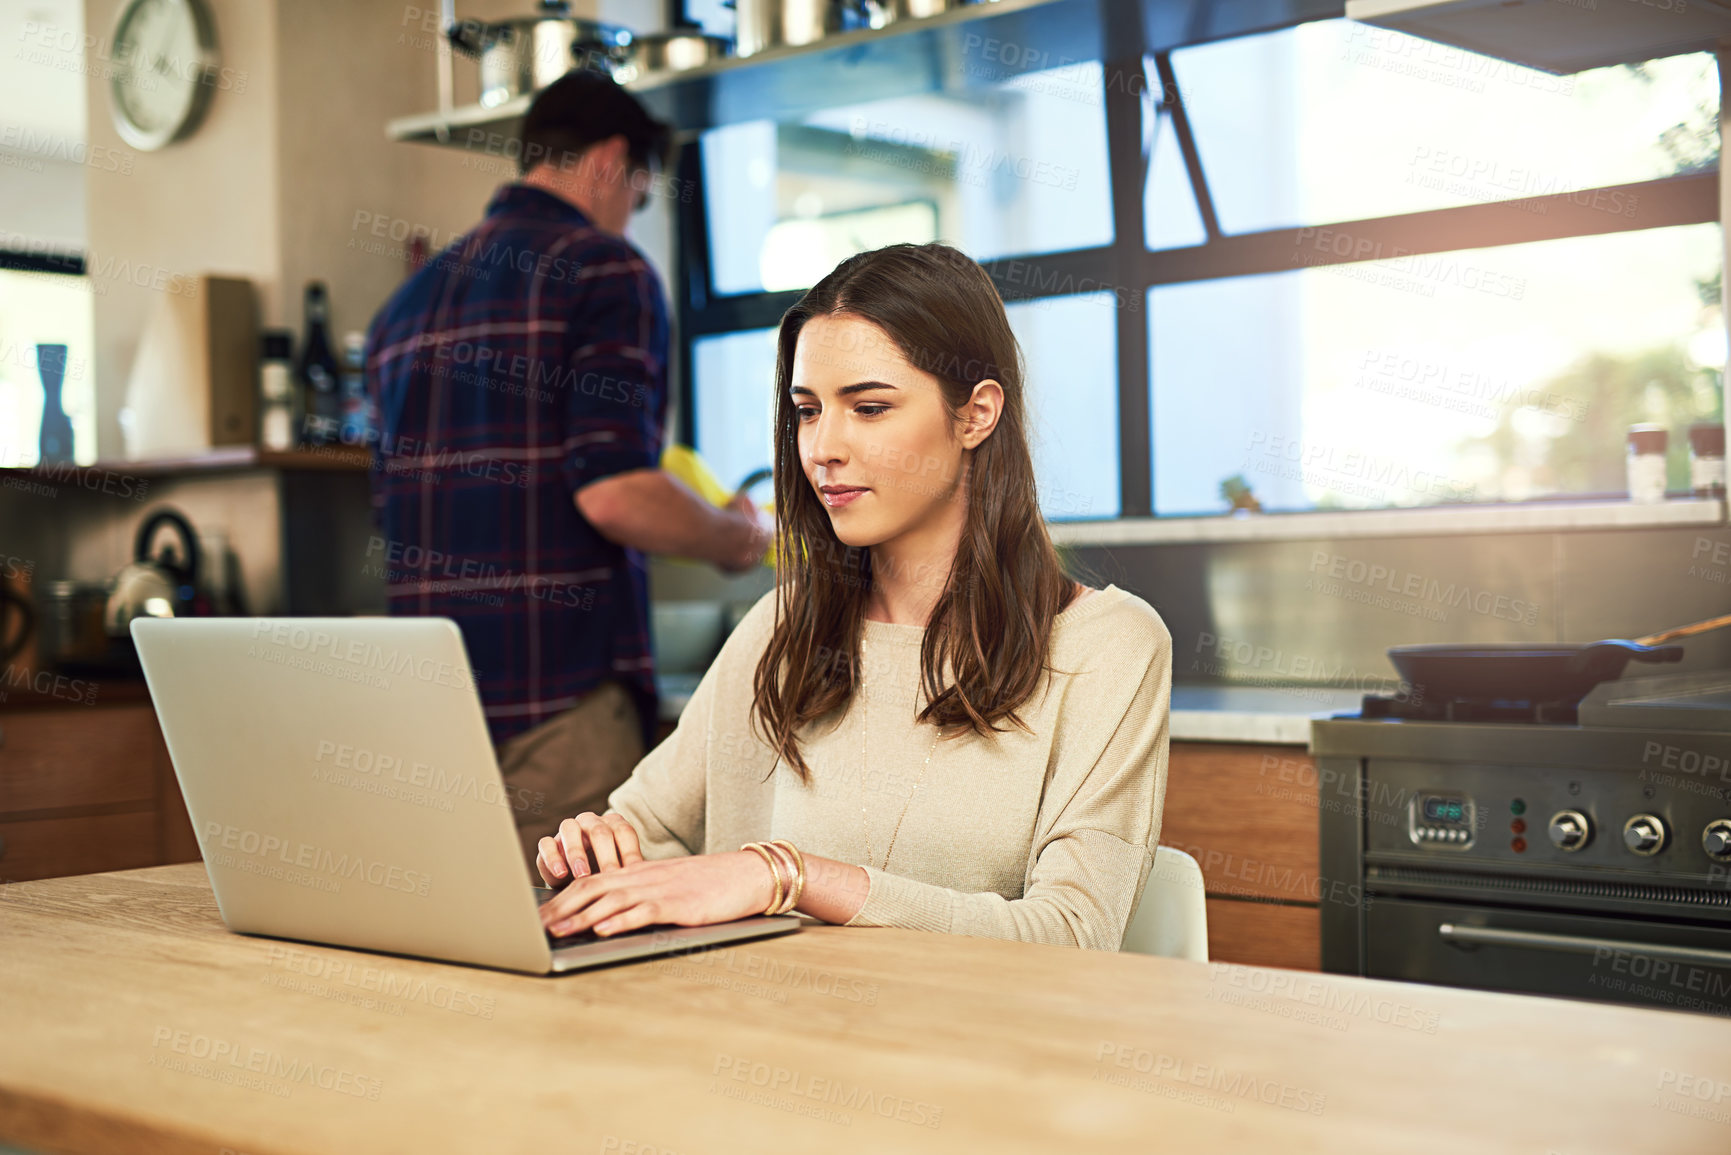 Buy stock photo Cropped shot of a young woman working on a laptop with her boyfriend in the background at home